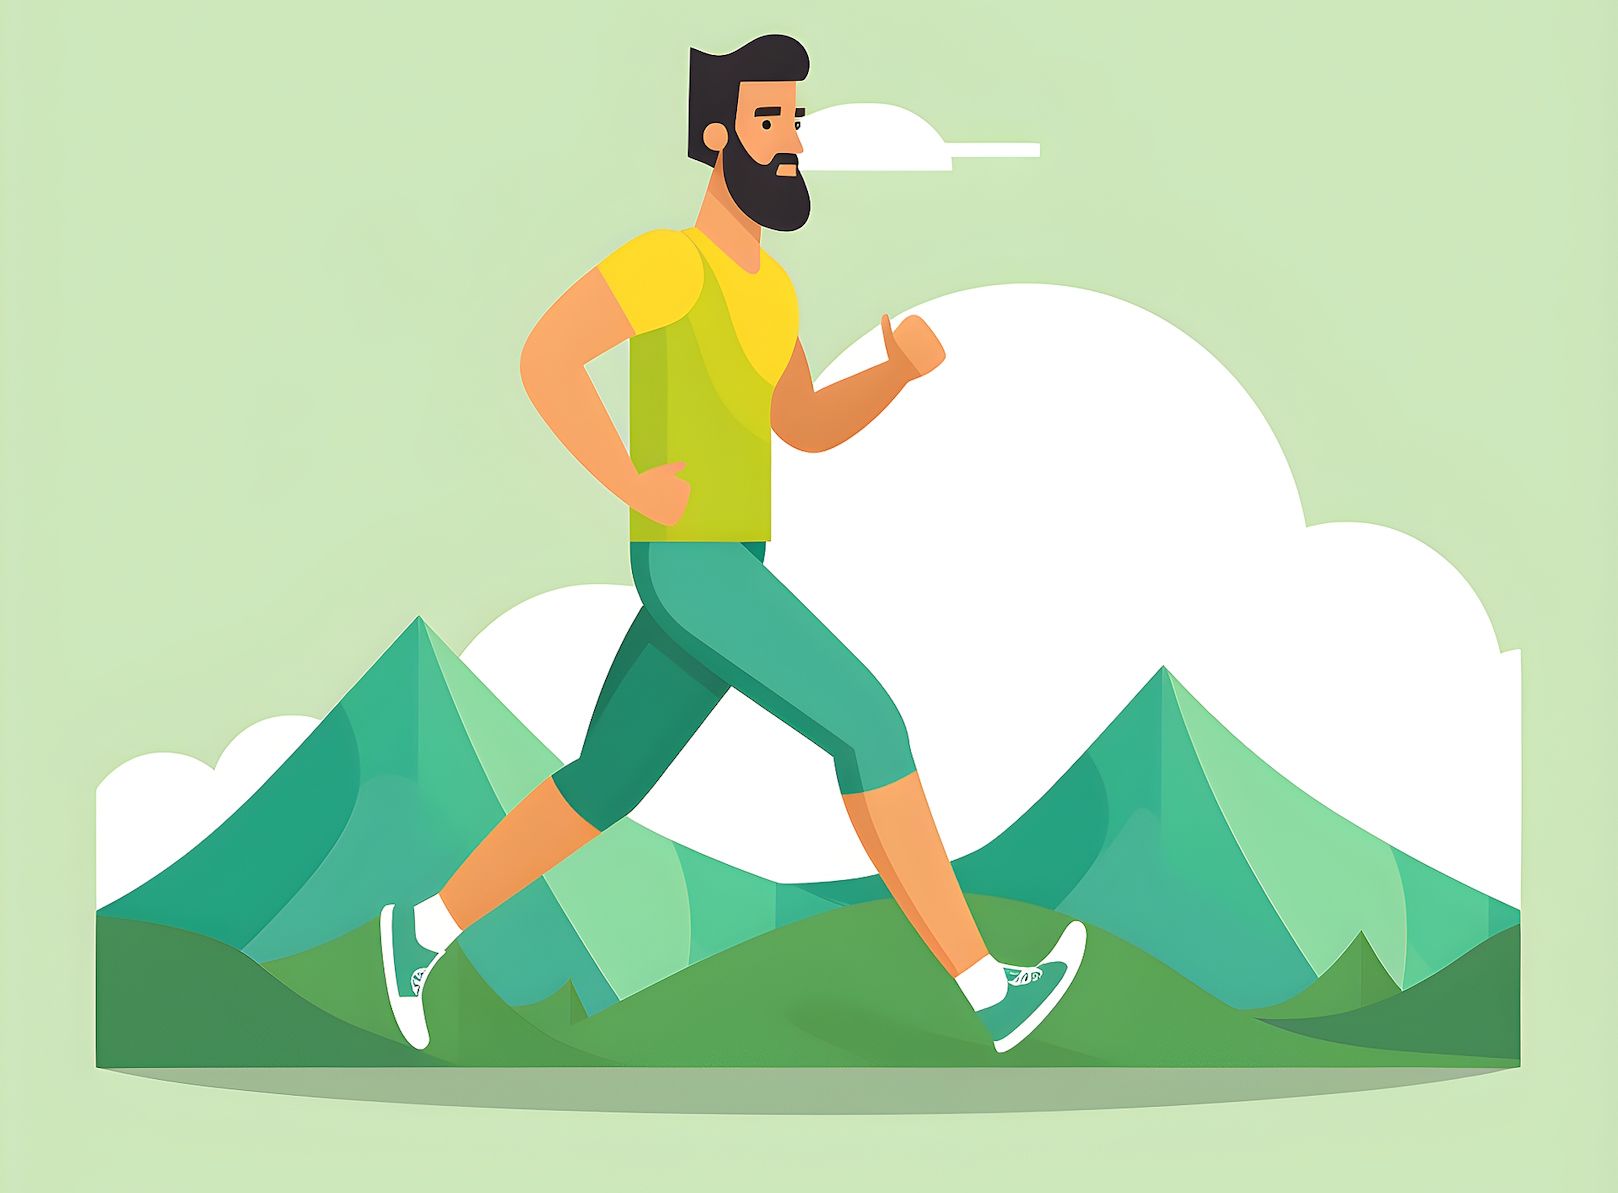 A cartoon man in green clothes with a beard running in nature with mountains and clouds in the background